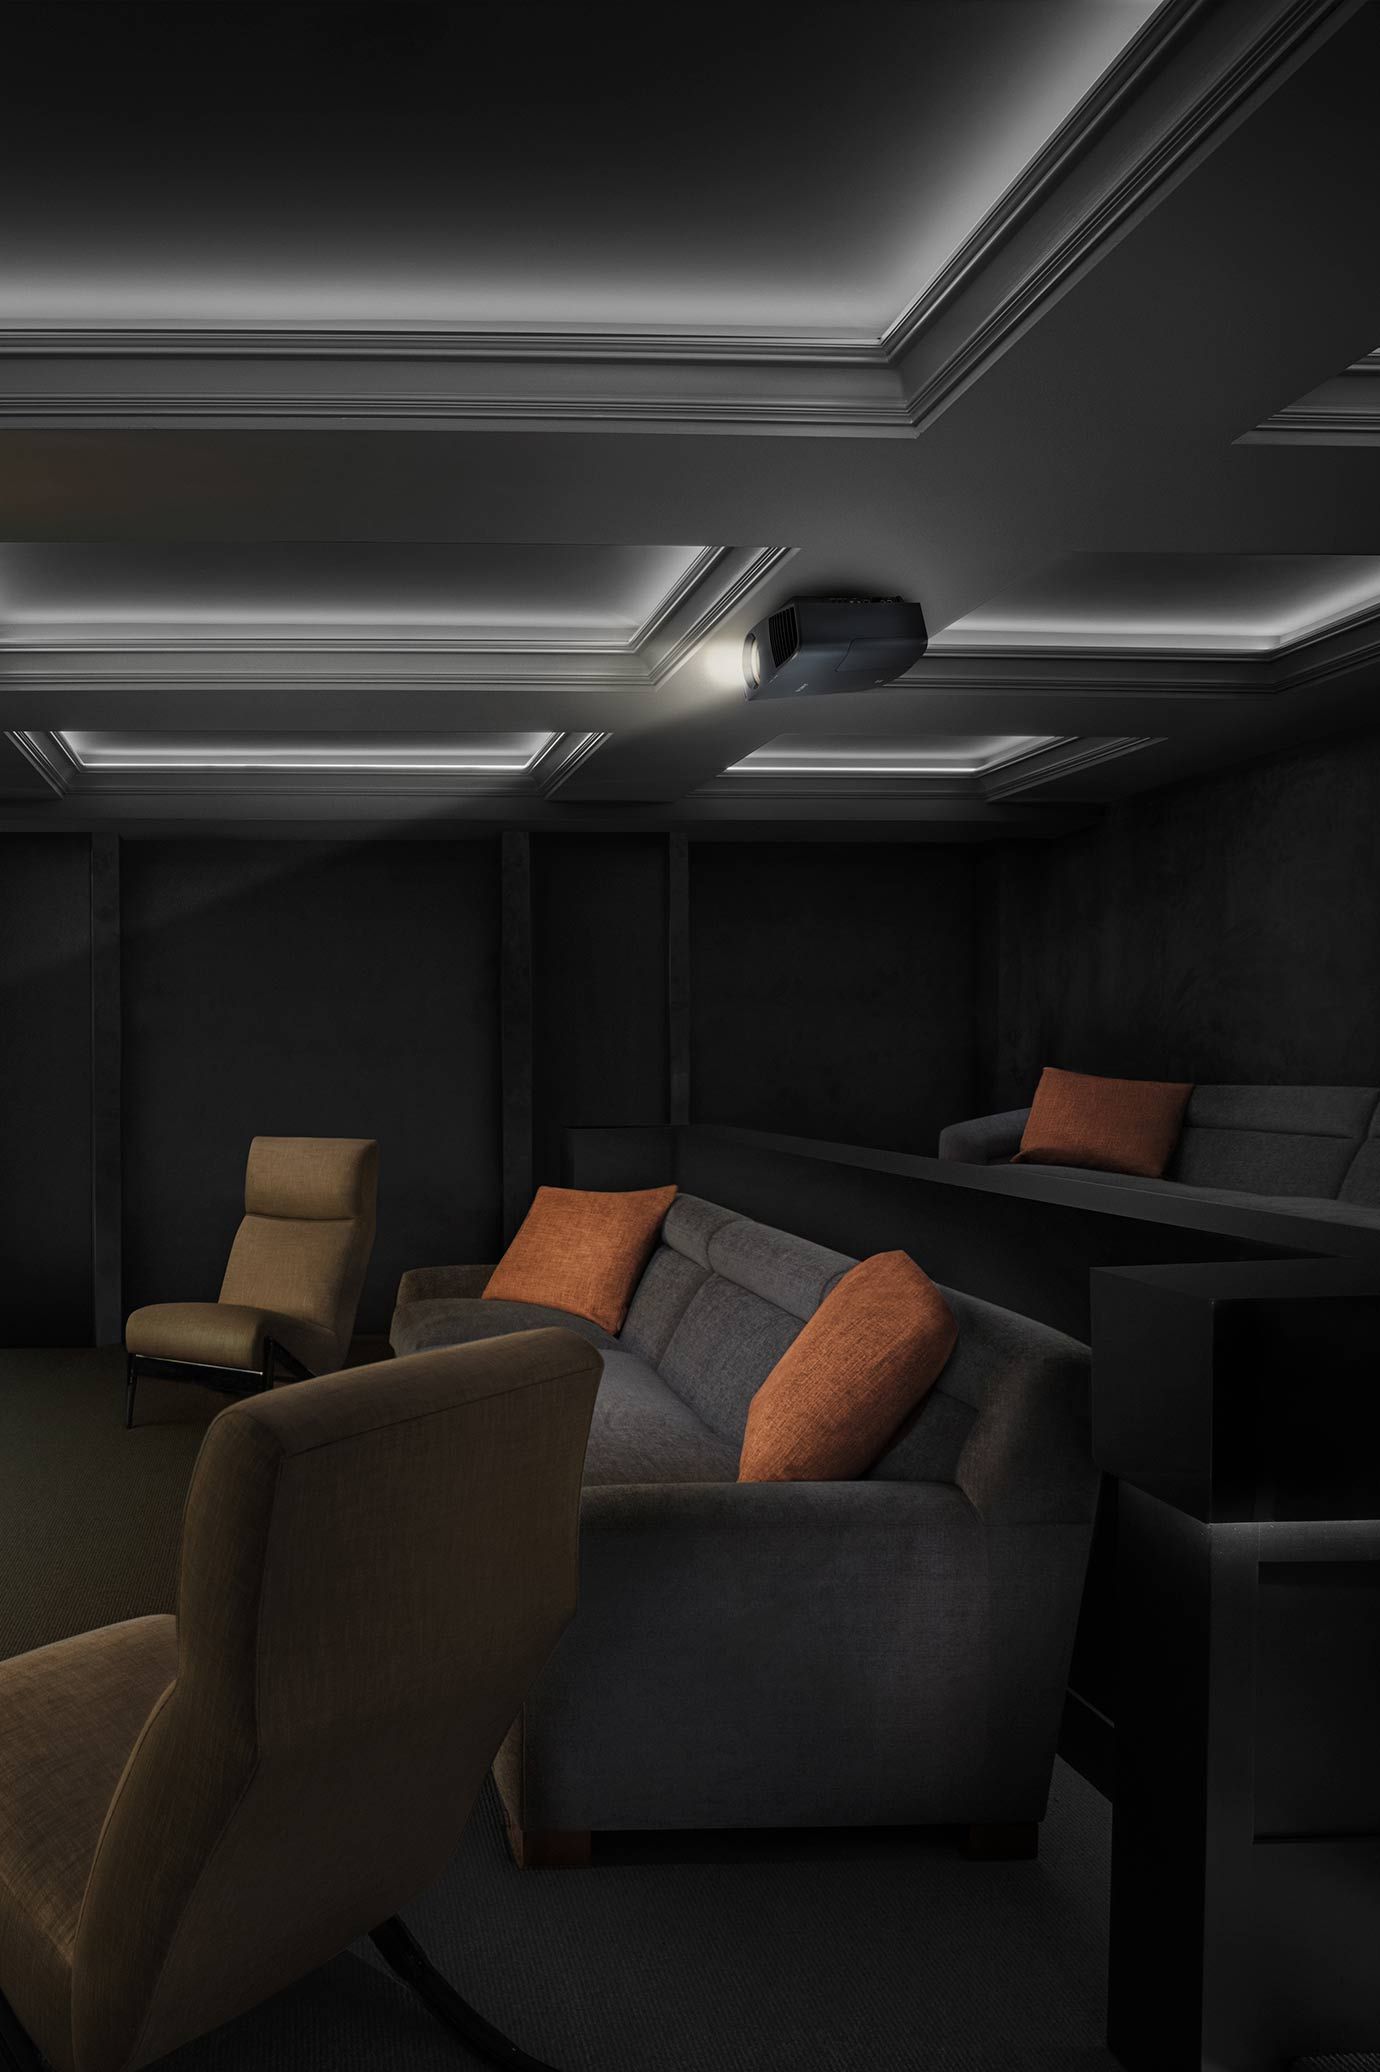 LED lighting in the ceiling of a home theater with dark walls and seating